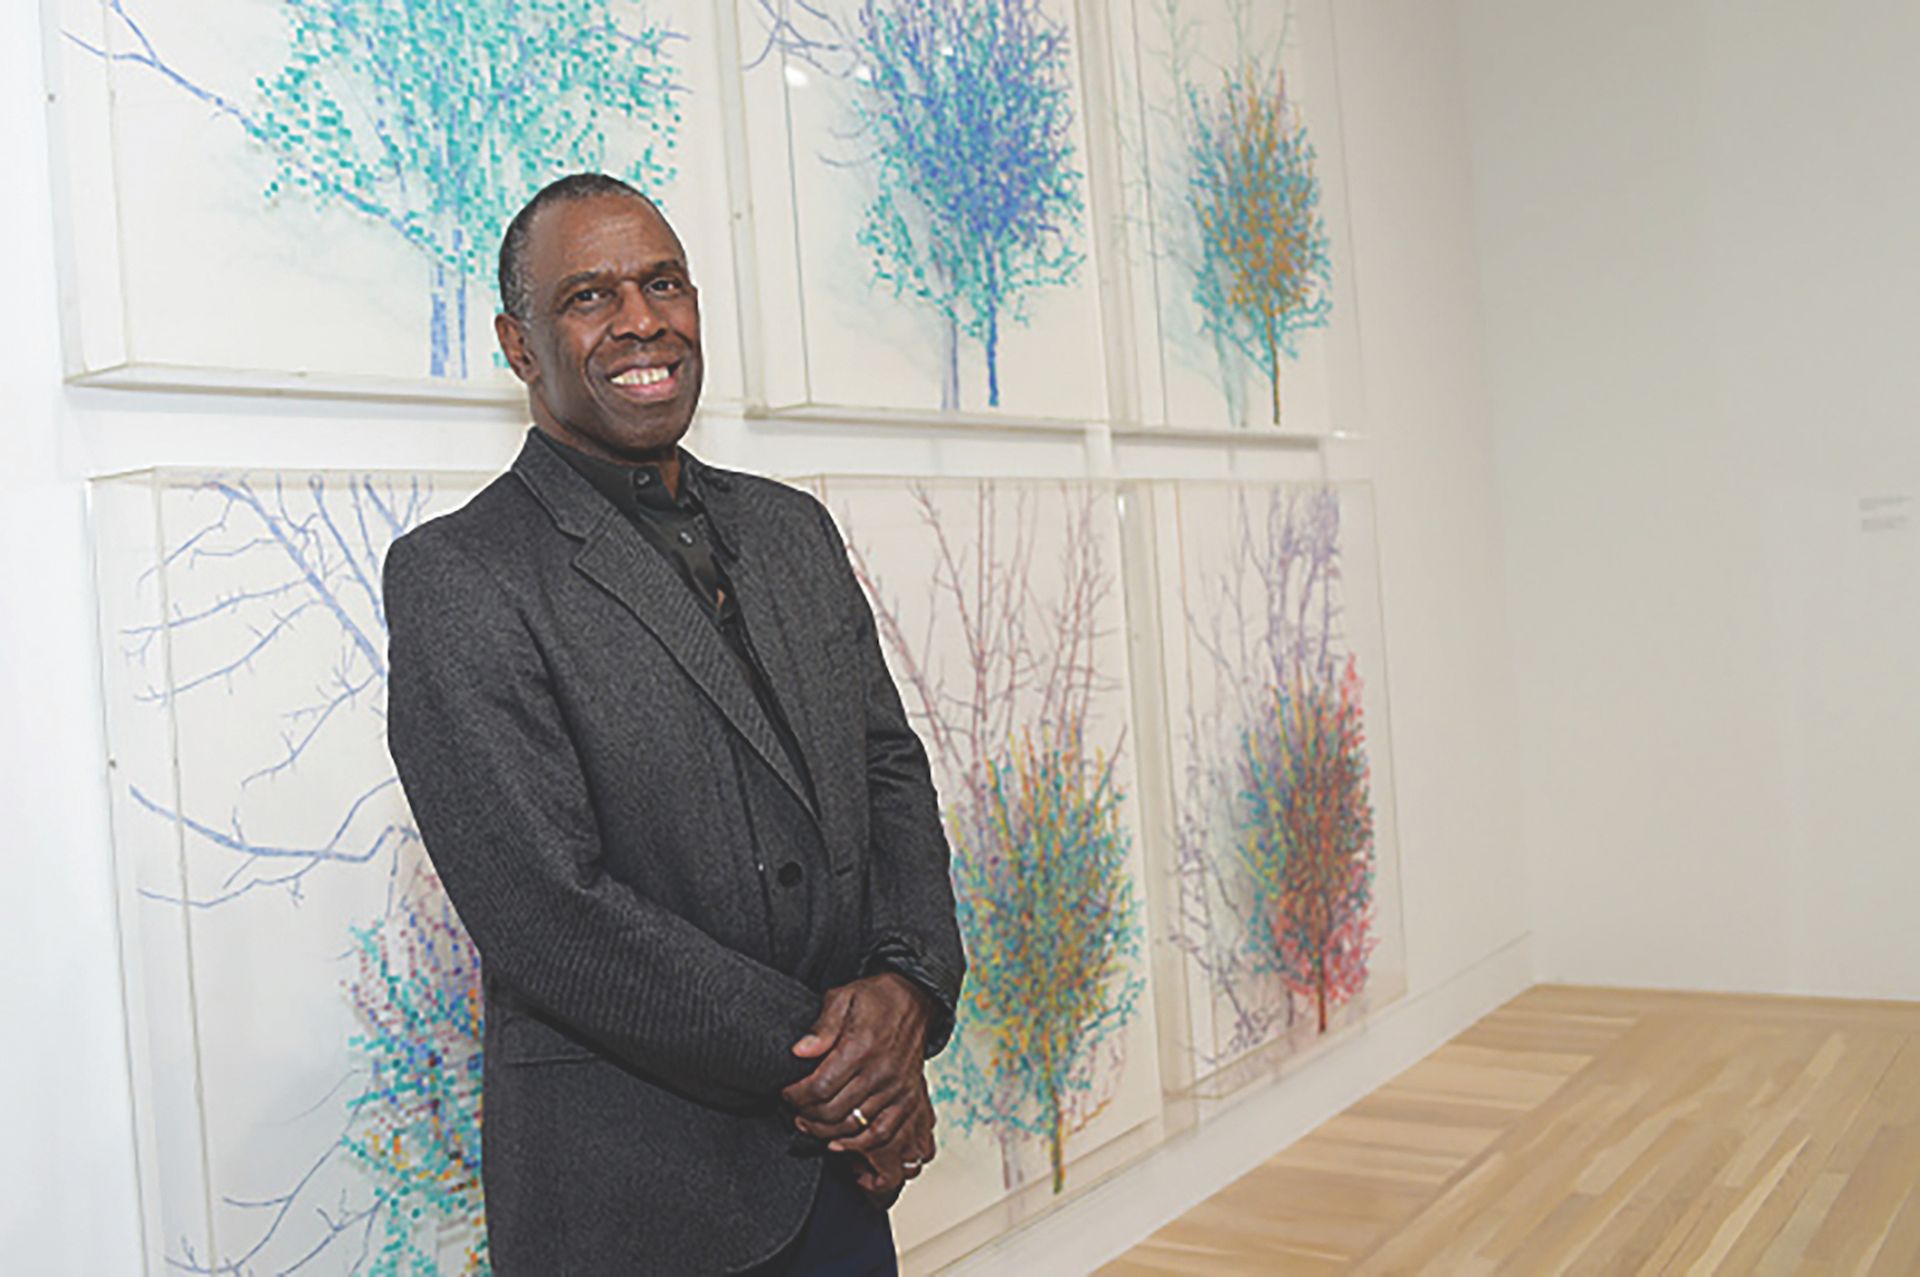 Charles Gaines attends an event at the Hammer Museum on 19 February 2015 in Los Angeles, California. Photo by Stefanie Keenan/Getty Images for Hammer Museum